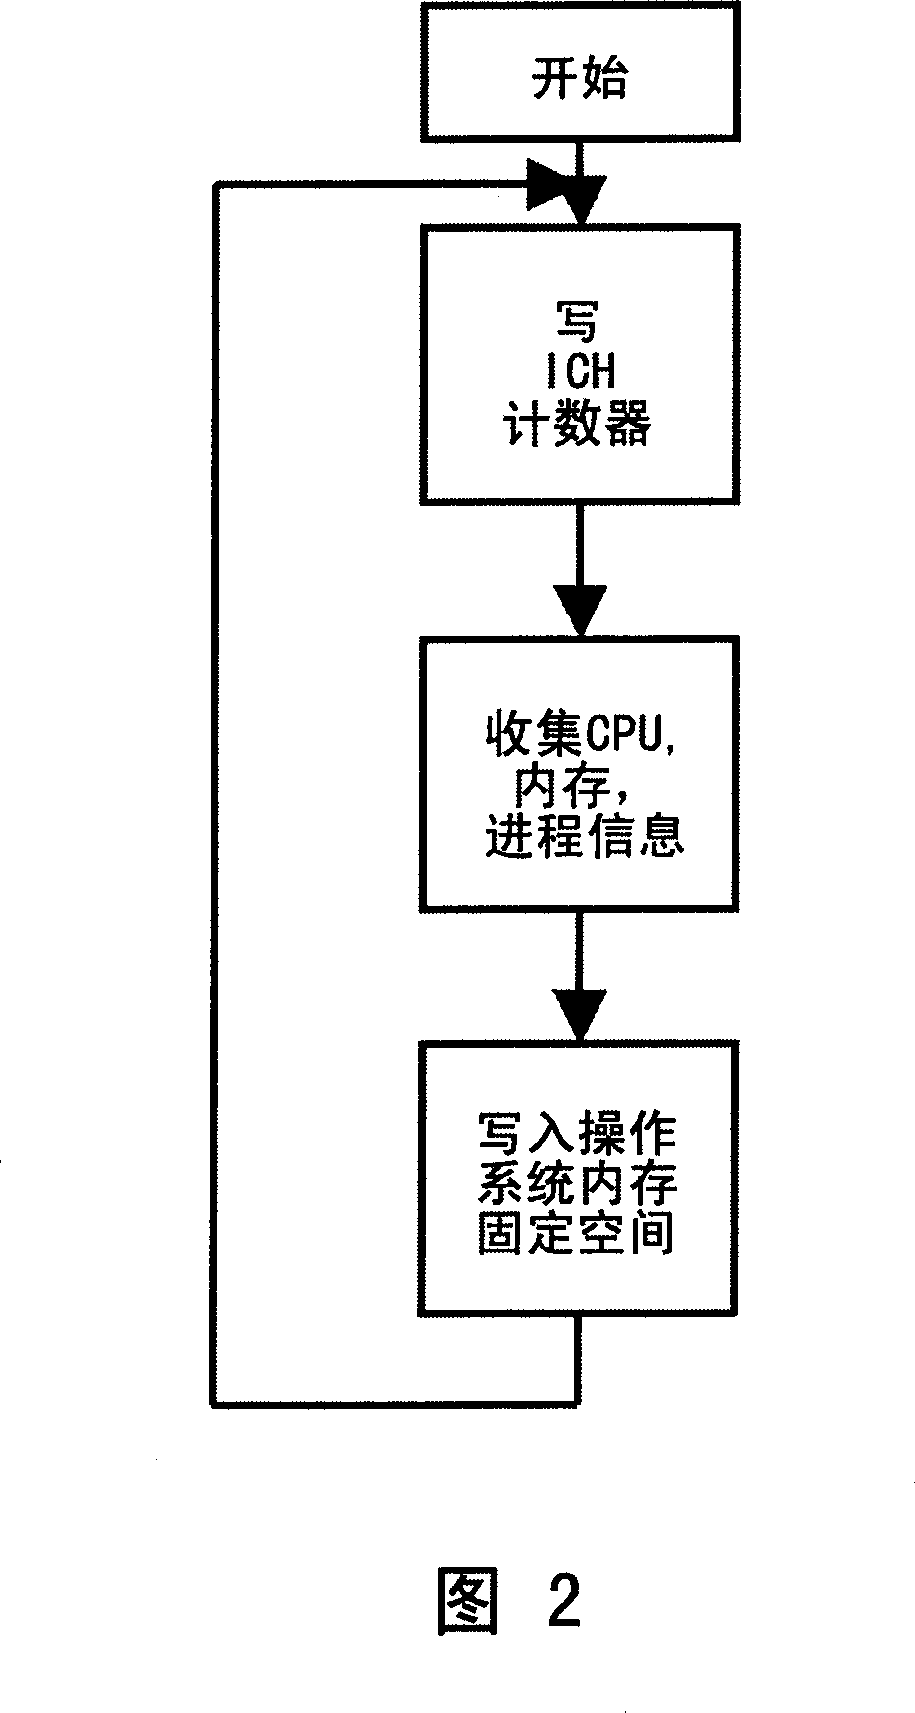 System and method for obtaining fault in-situ information for computer operating system